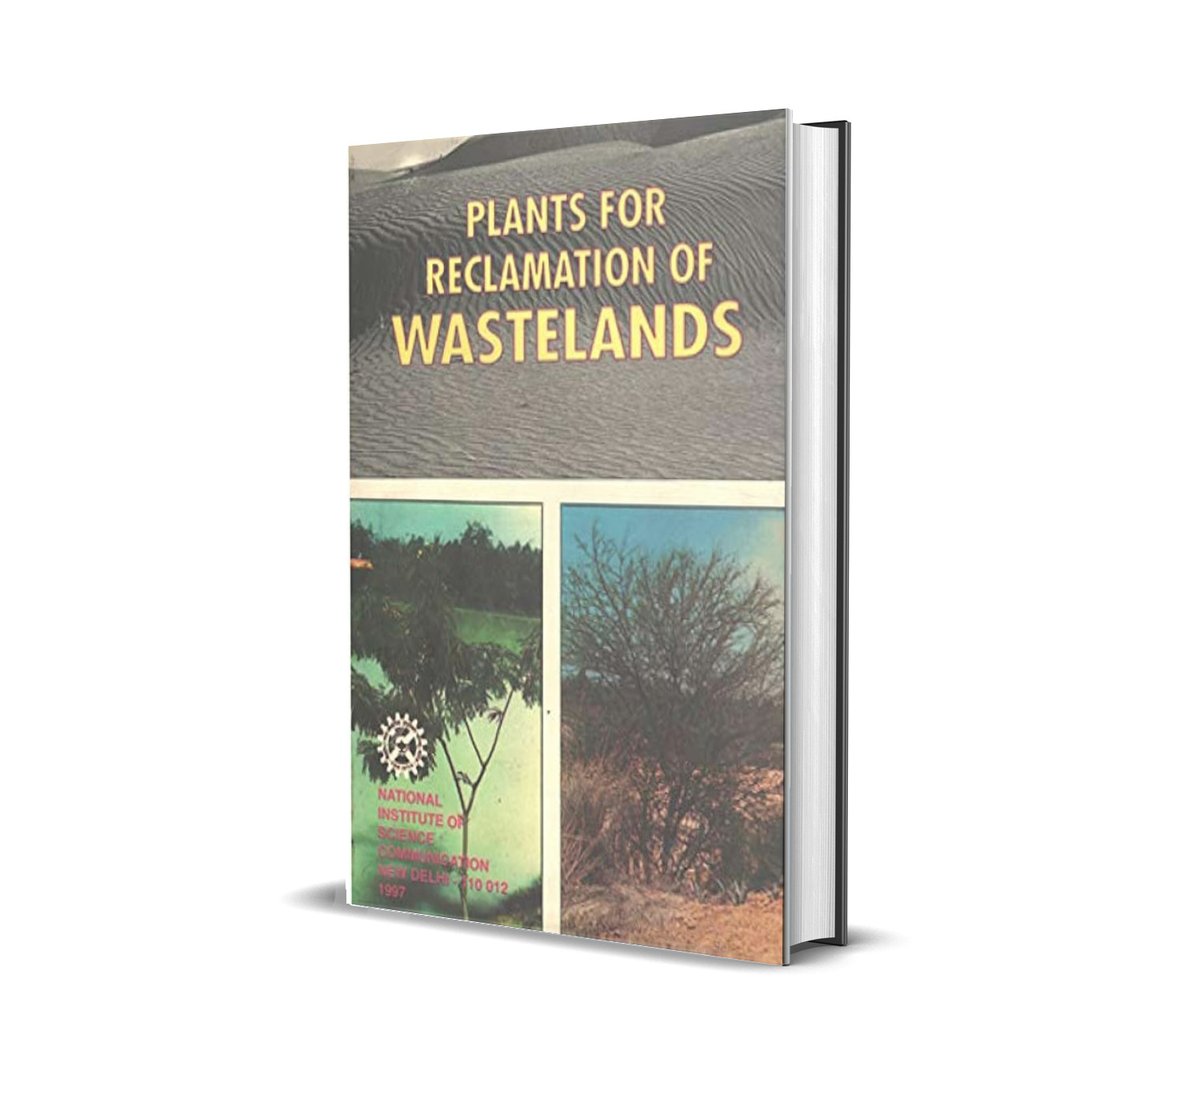 Reclaiming Wastelands, Nourishing a Nation! Discover the potential of India's 175MM ha of wastelands'Plants for Reclamation of Wastelands' @CSIR_NIScPR Publication holds key to improving soil & meeting the needs of food, fodder, fuel, and more. buy at head.bdgi@niscpr.res.in